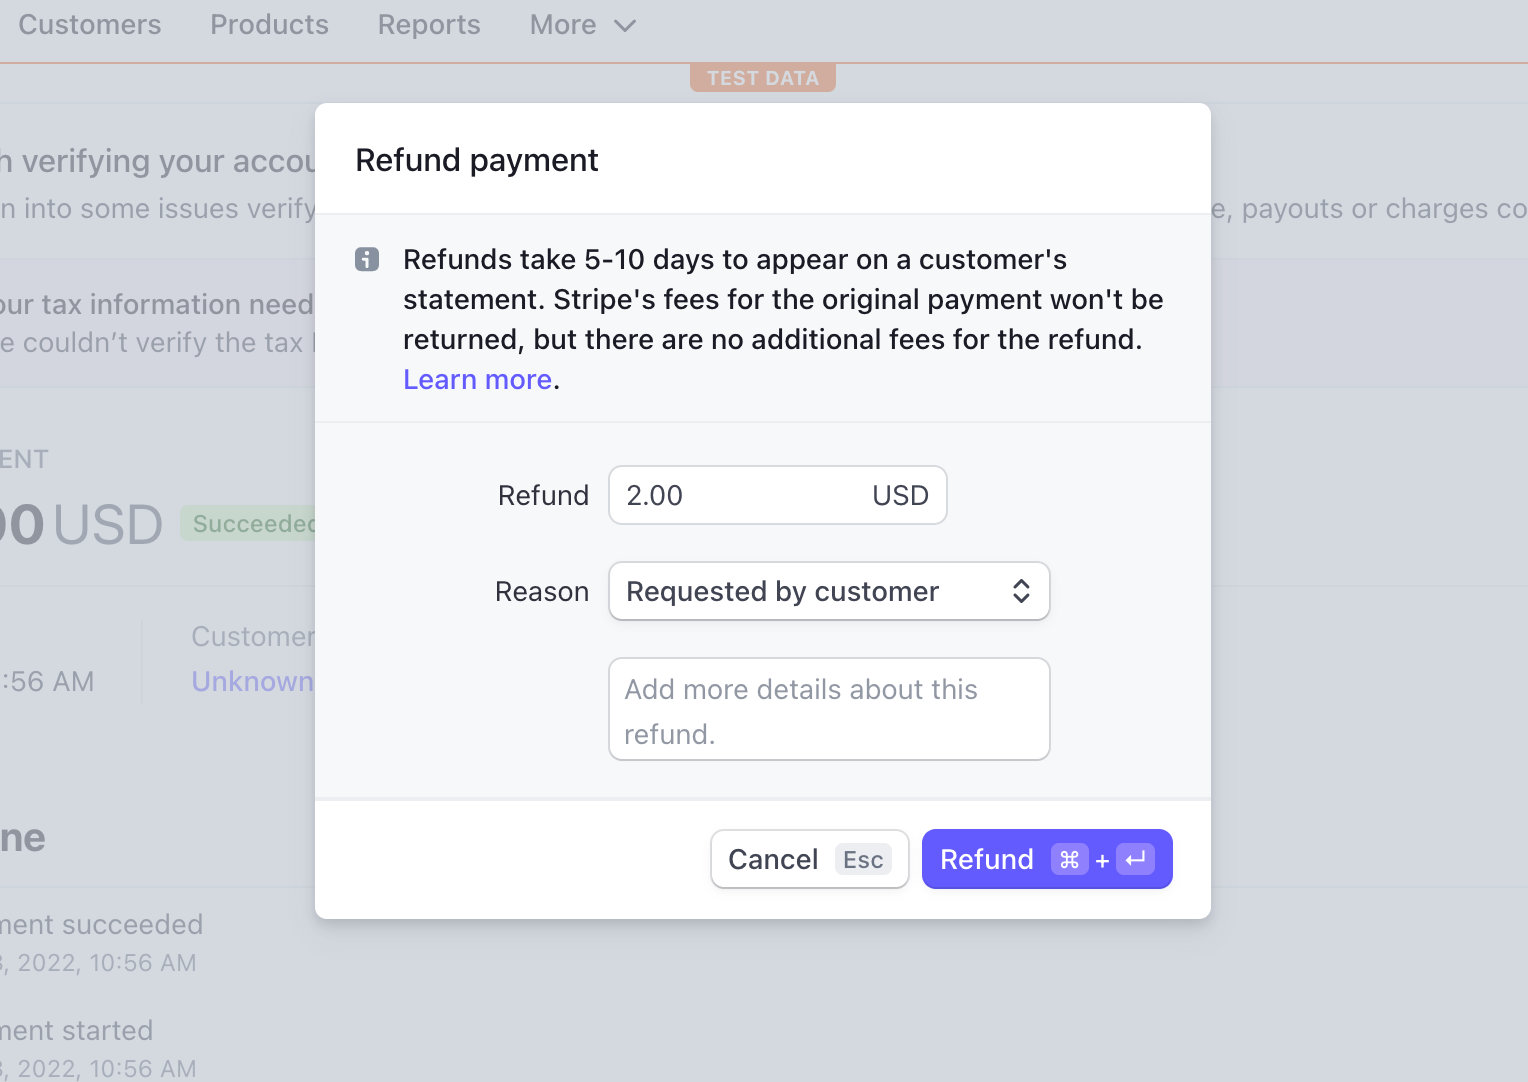 Refund with Stripe and Tickets Commerce